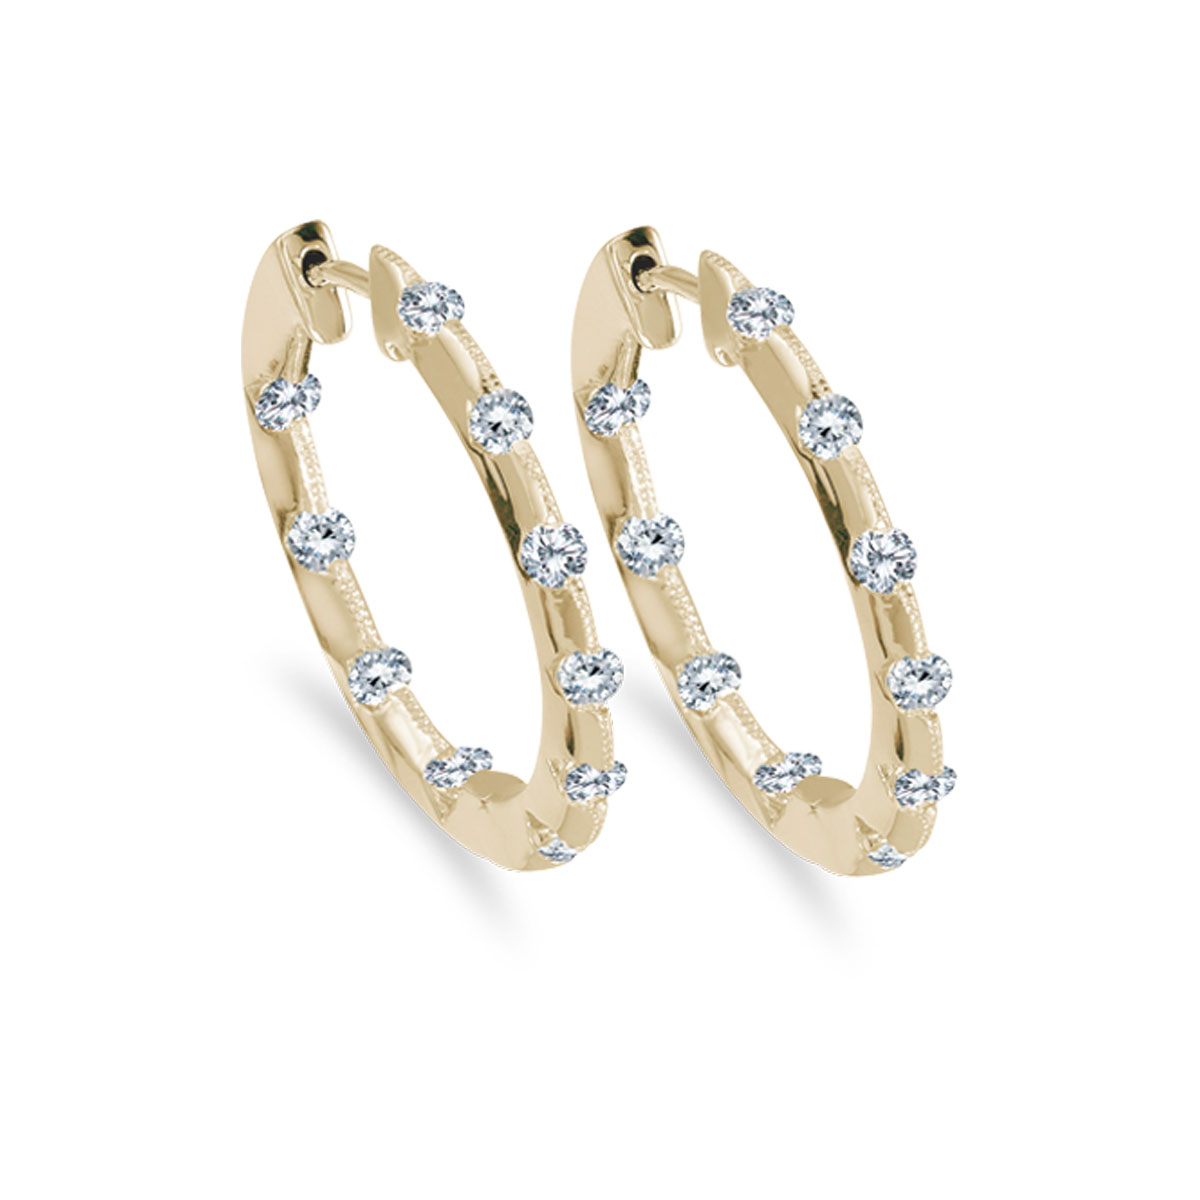 24 mm diamond inside/outside hoop earrings in beautiful 14k yellow gold. The perfect look for day or night. 1.00 carat genuine diamonds.